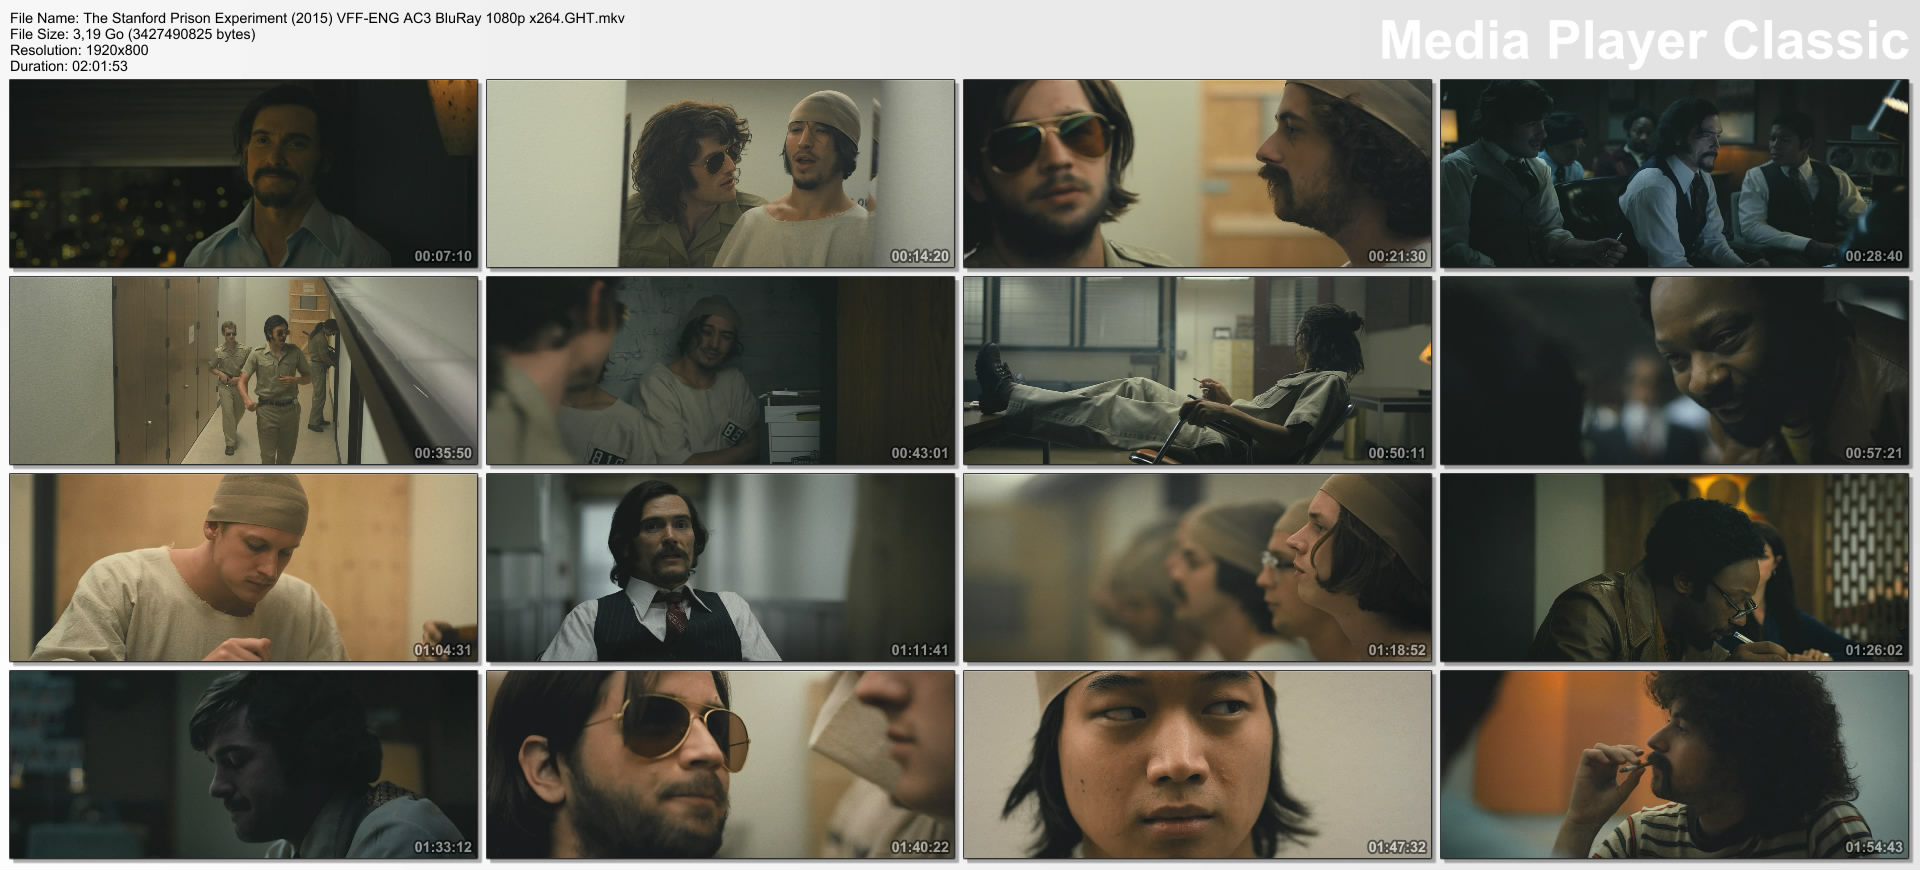 The Stanford Prison Experiment (2015) VFF-ENG AC3 BluRay 1080p x264.GHT